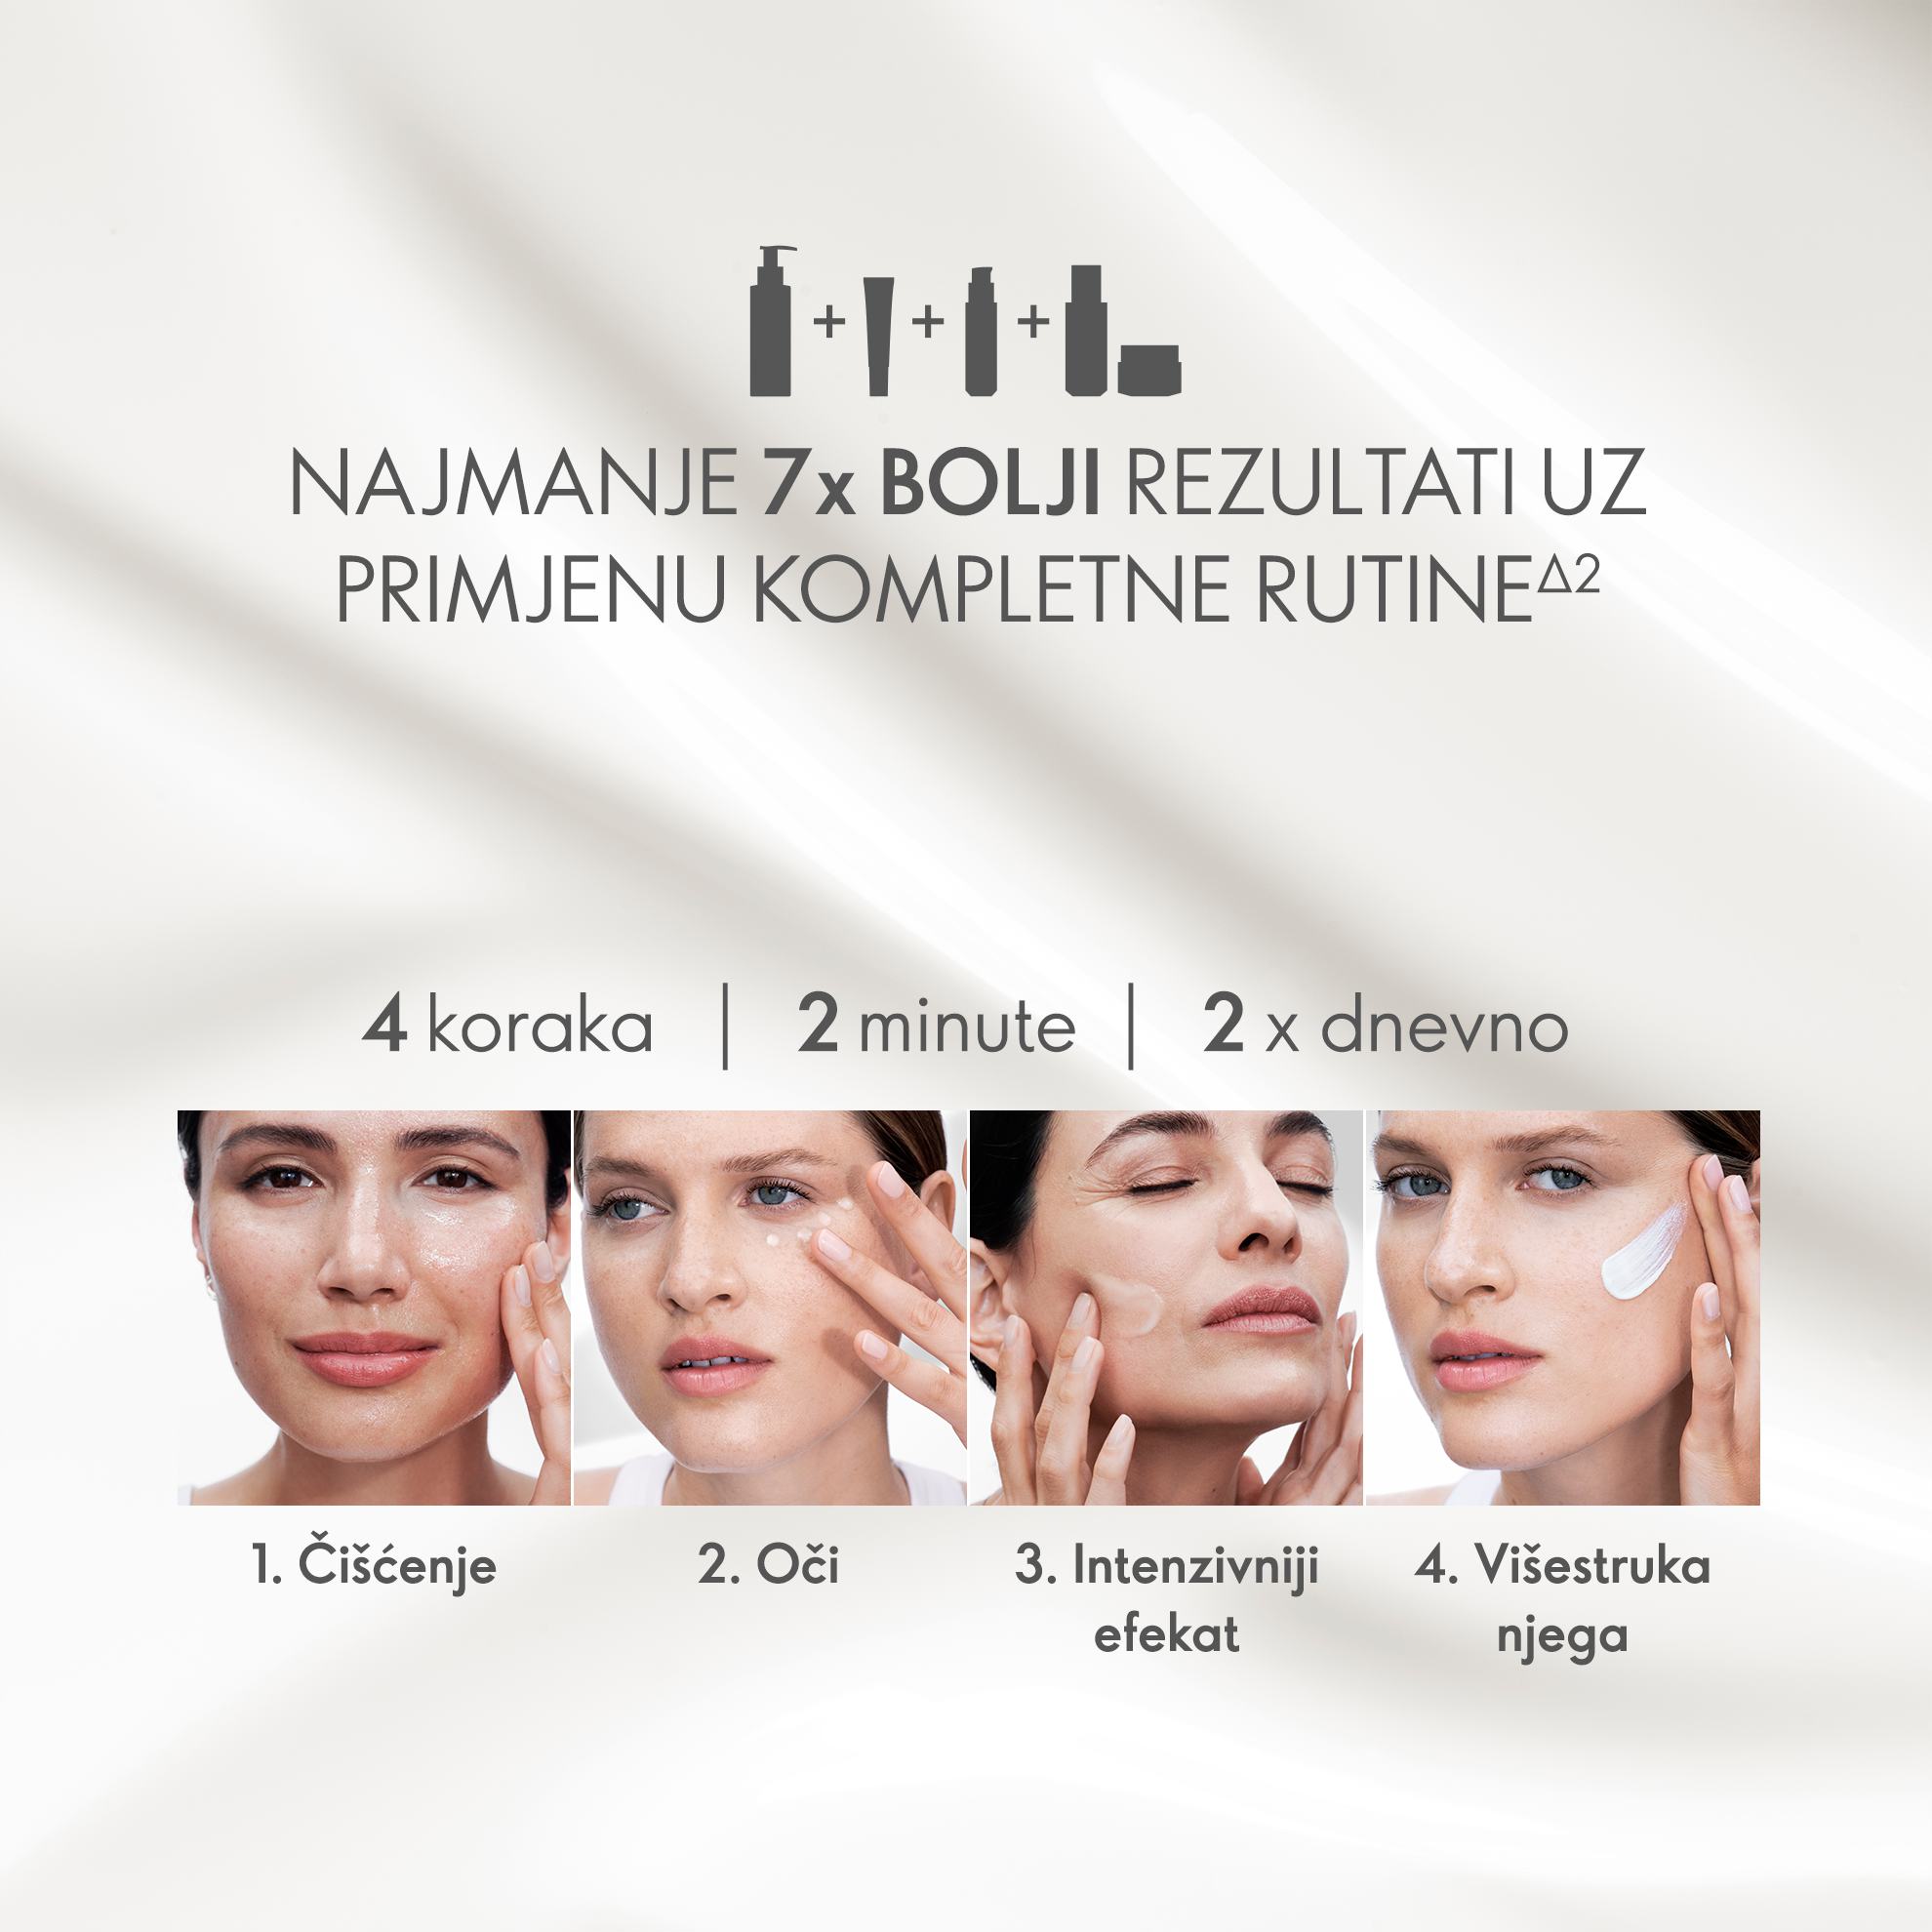 https://media-cdn.oriflame.com/productImage?externalMediaId=product-management-media%2fProducts%2f45608%2fBA%2f45608_5.png&id=17590764&version=2